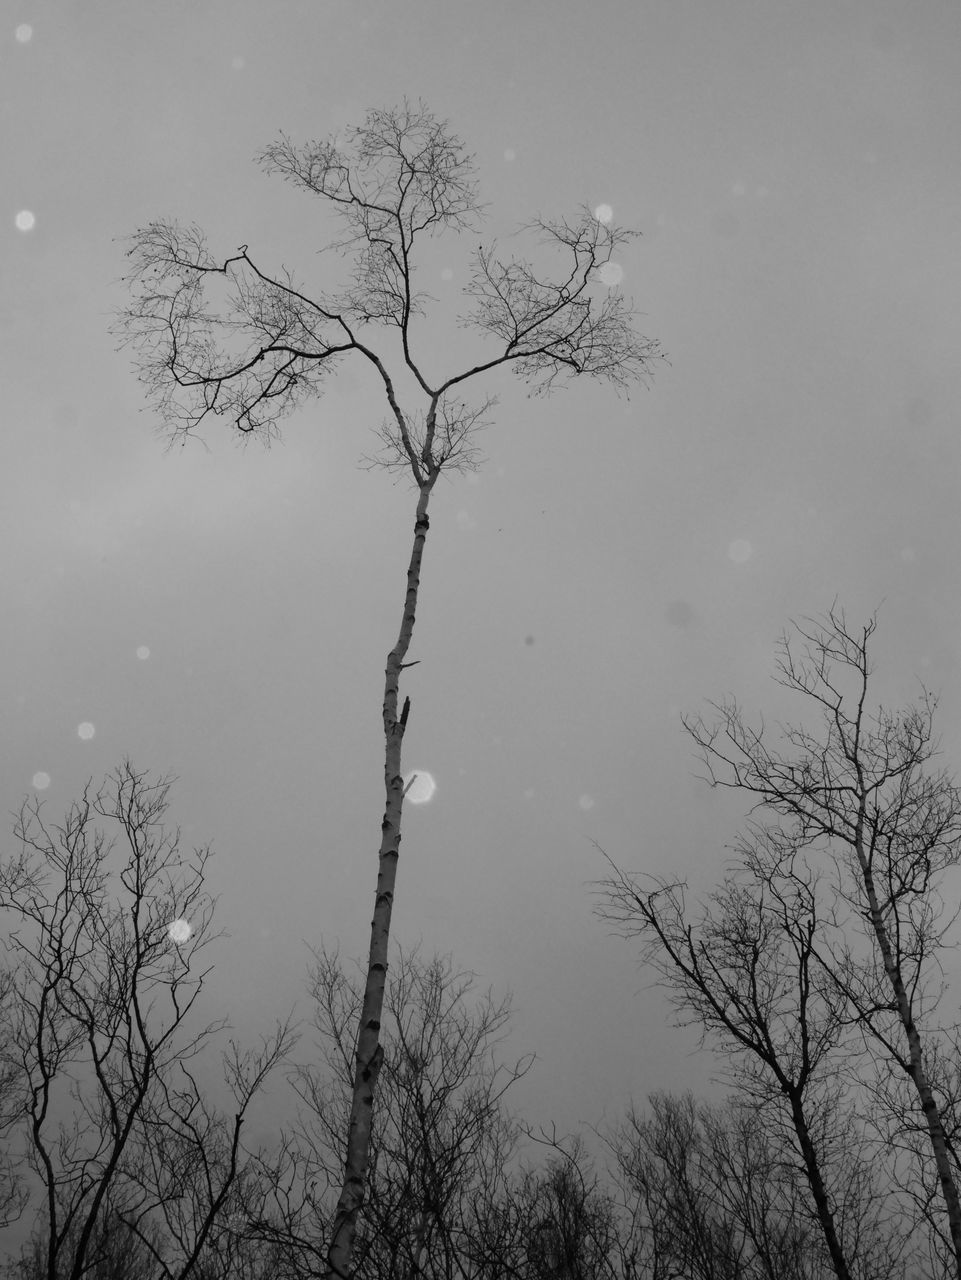 tree, bare tree, branch, plant, sky, nature, black and white, winter, beauty in nature, monochrome, no people, tranquility, monochrome photography, scenics - nature, outdoors, cloud, fog, low angle view, mist, tranquil scene, darkness, environment, silhouette, snow, trunk, tree trunk, leaf, non-urban scene, twig